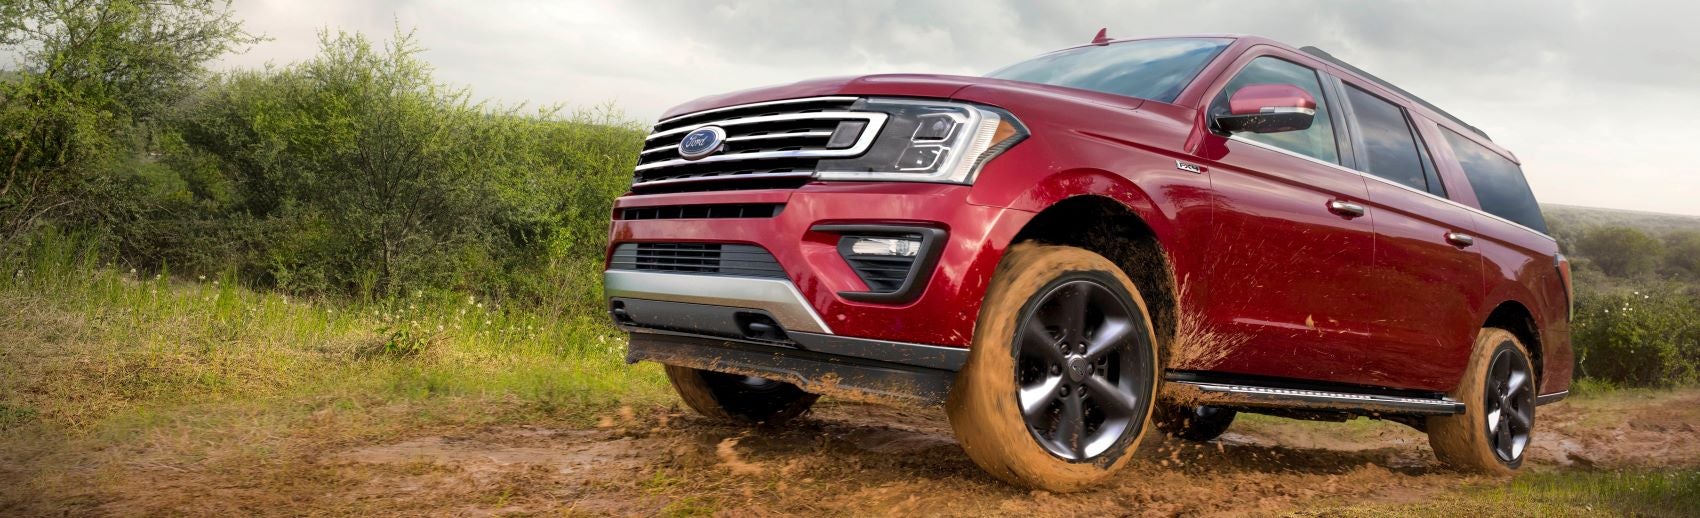 Test Drive The 2021 Ford Expedition Today!